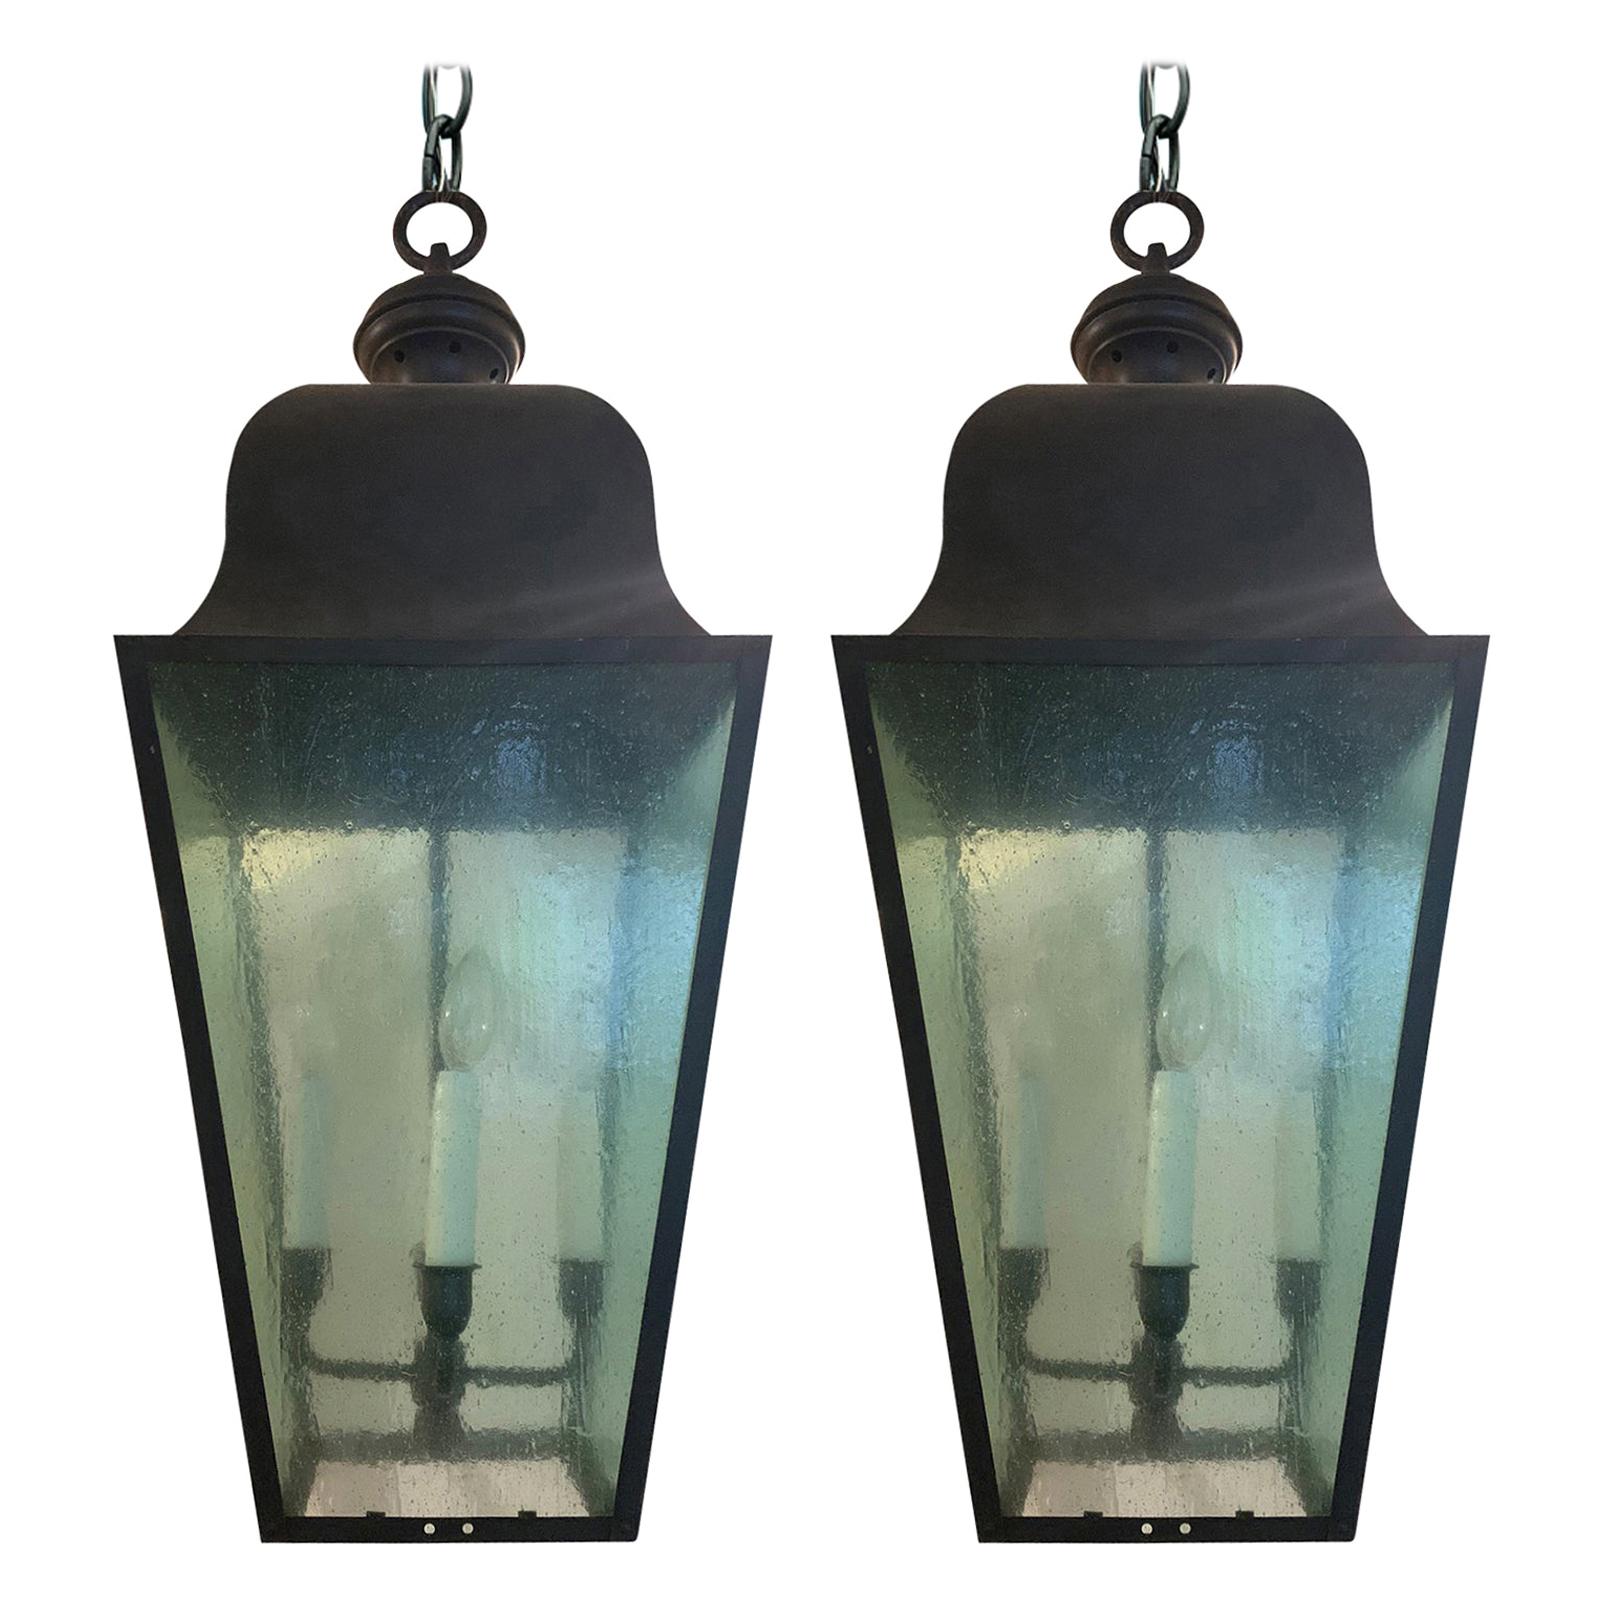 Pair of Large 20th Century Black Iron Four-Light Lanterns with Tinted Glass